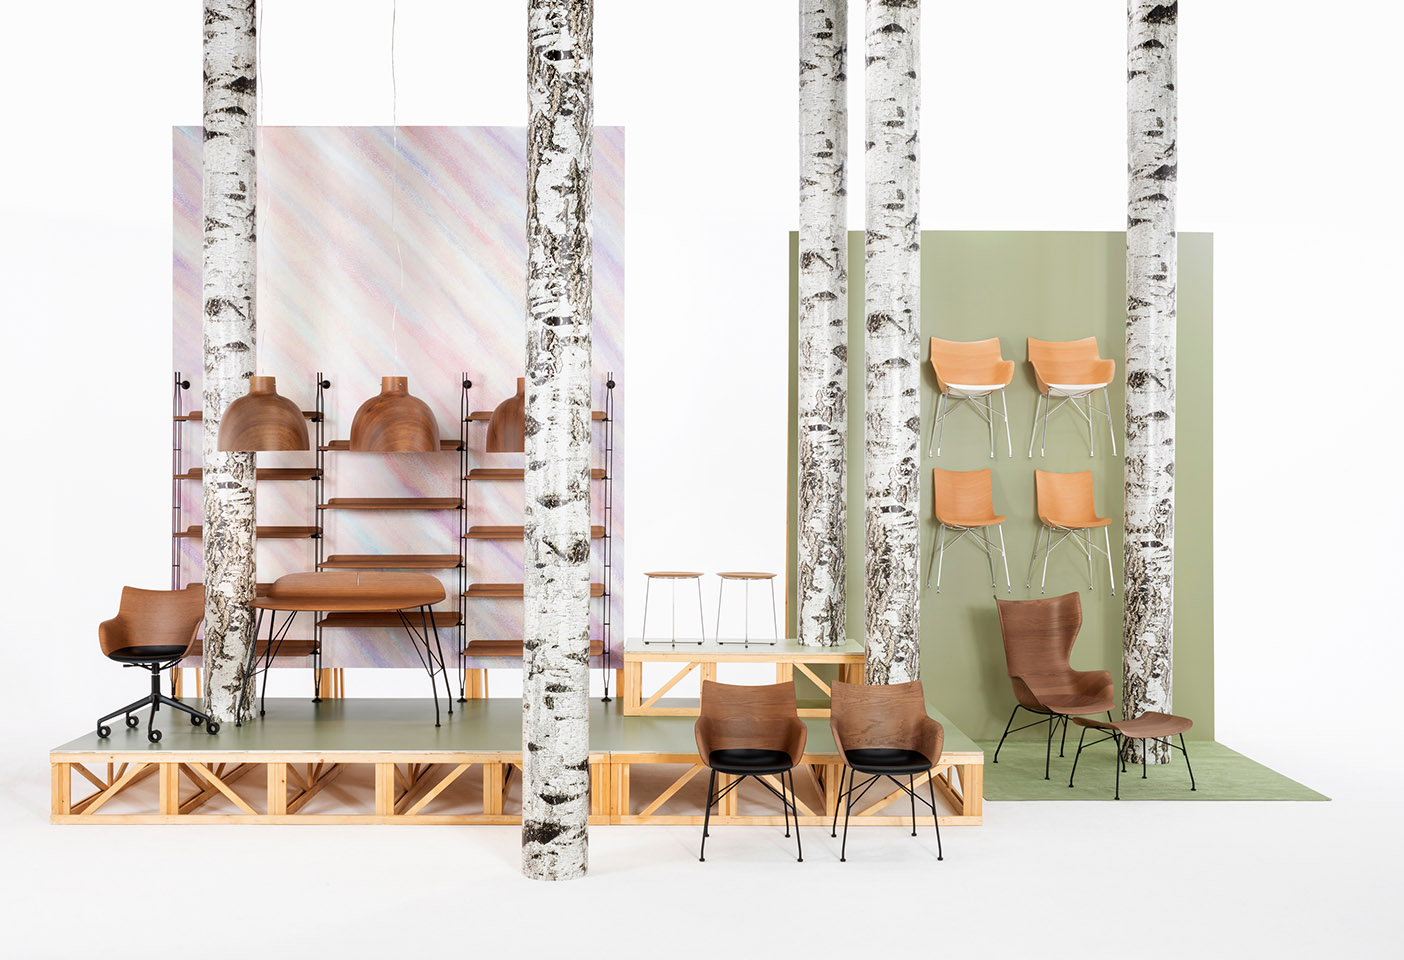 Philippe Starck's Smart Wood collection that began Kartell's move into new materials includes the new Viscount of Wood tables and versions of the Q/Wood and P/Wood armchairs with wheels. Photo c/o Kartell. 